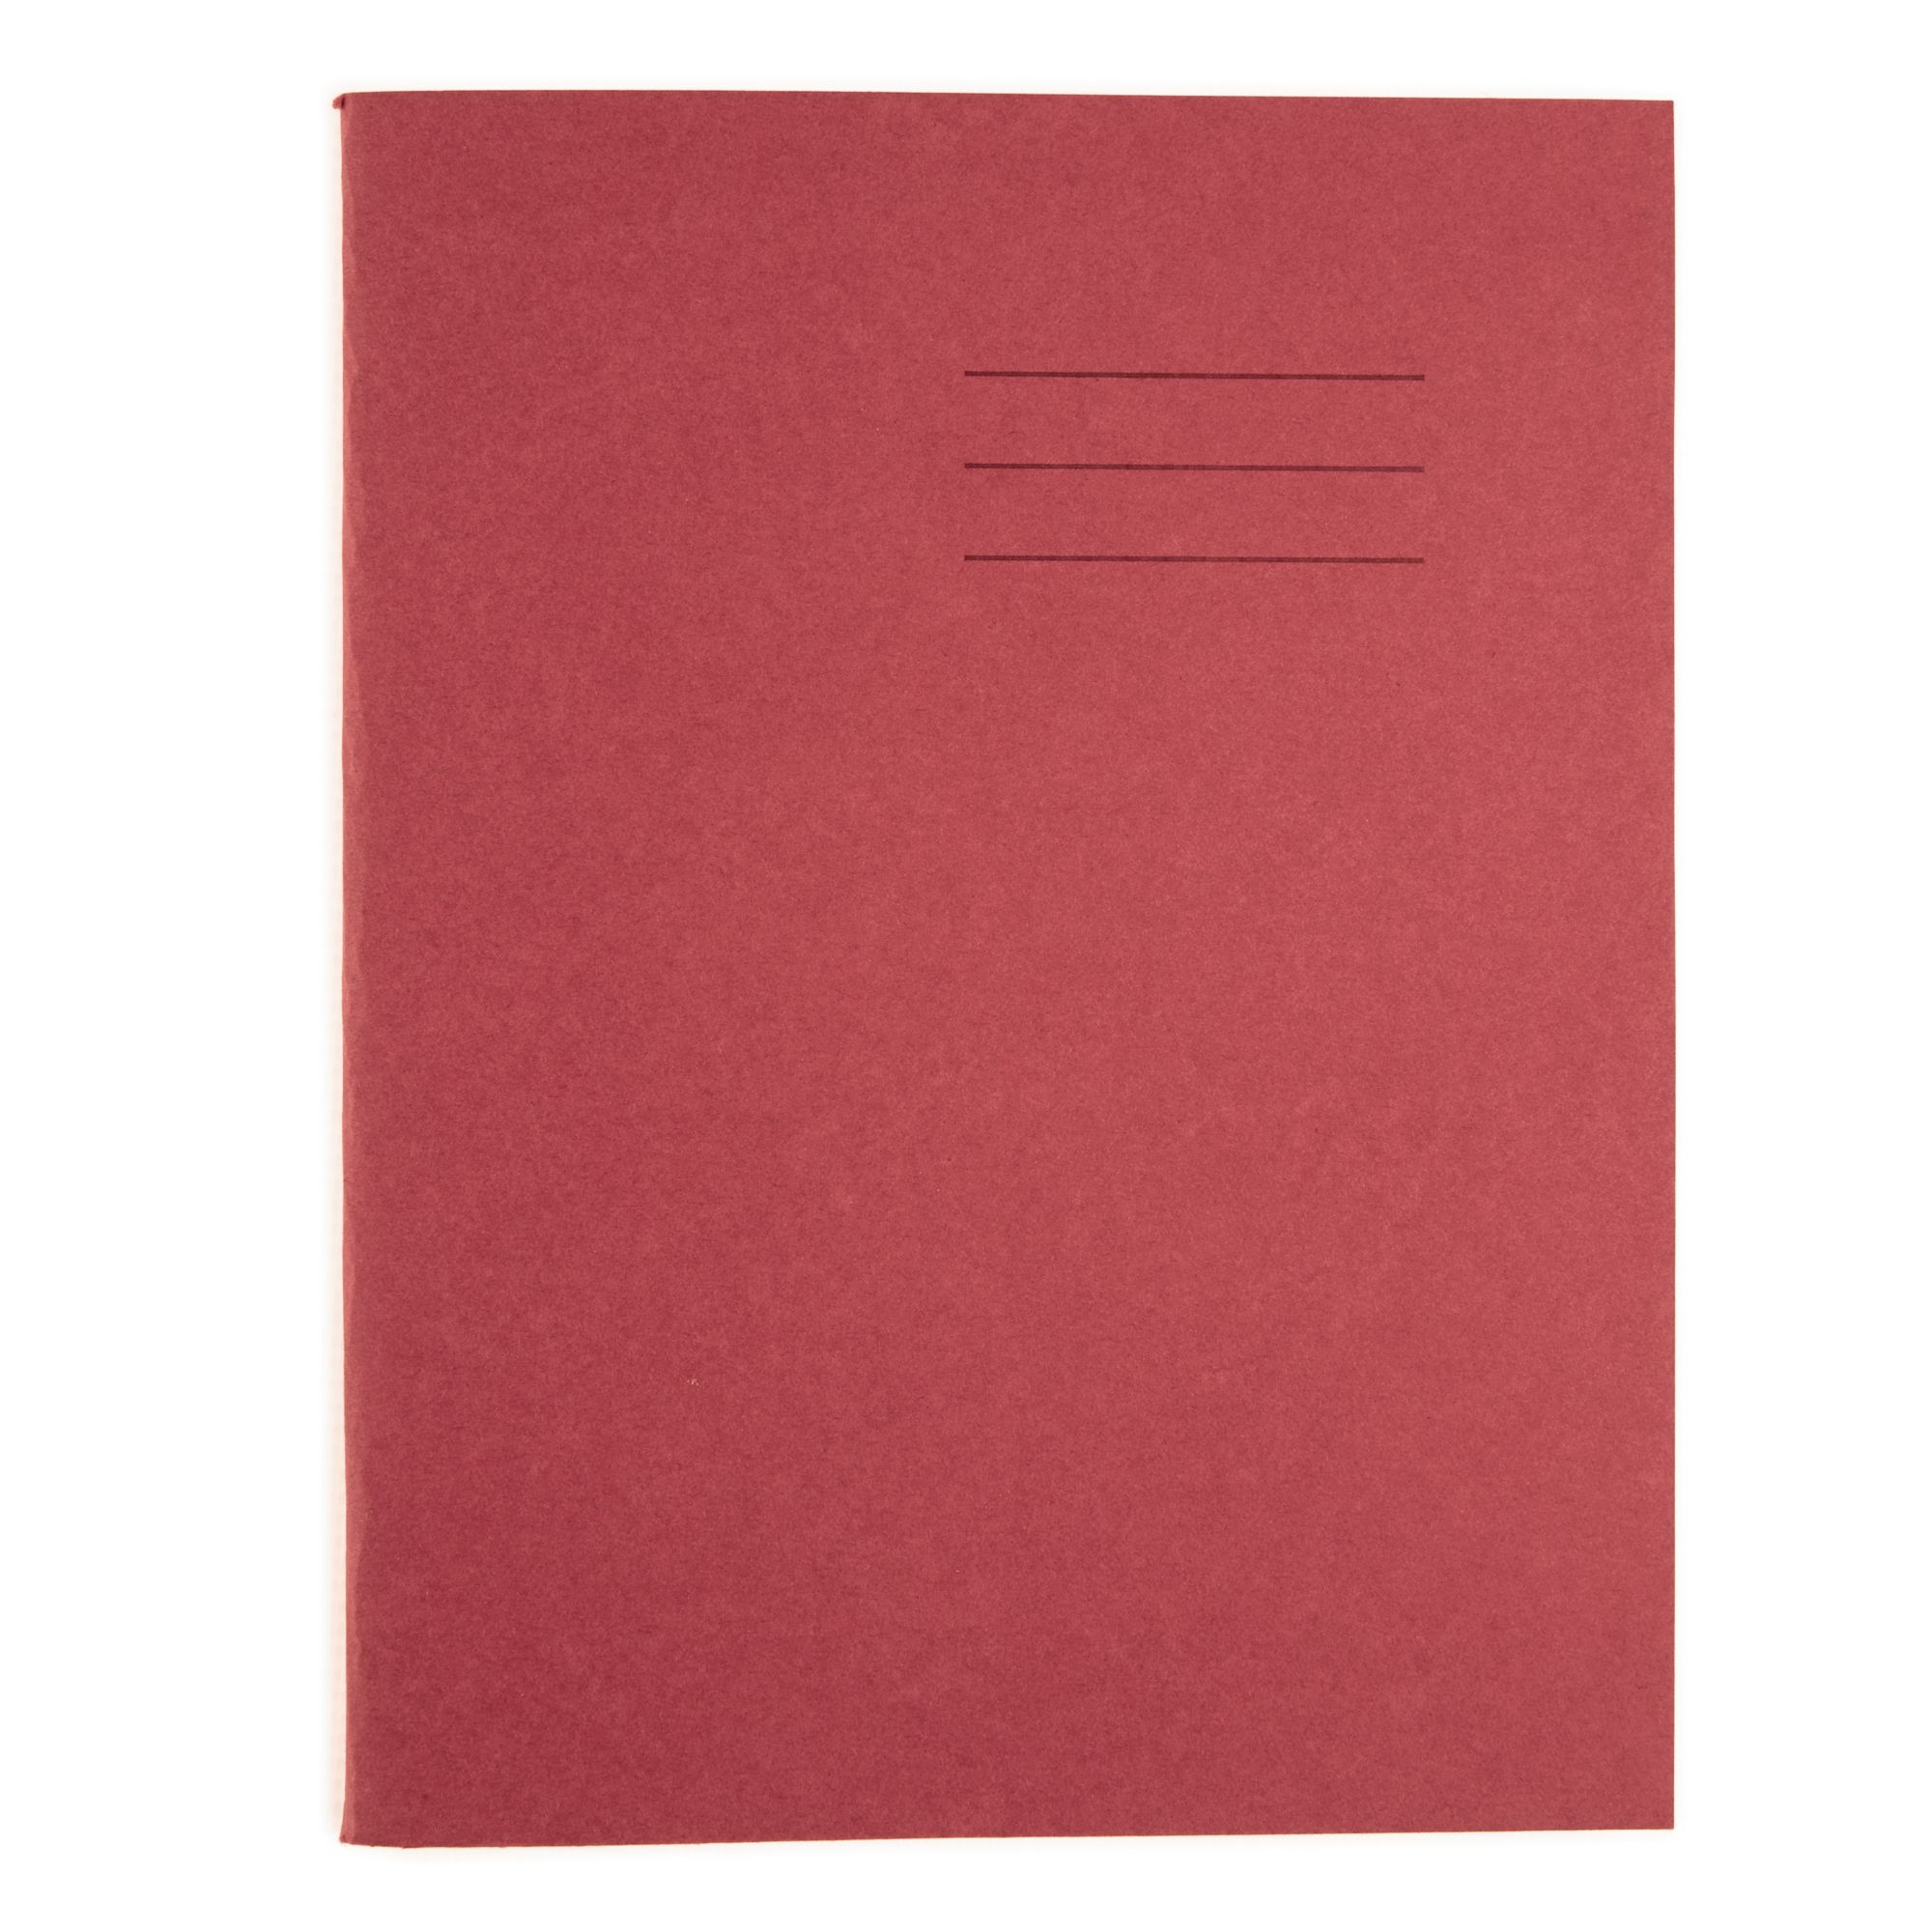 Classmates Red 5.25x6.5" 24 page 15mm Ruled Exercise Book - Pack of 100